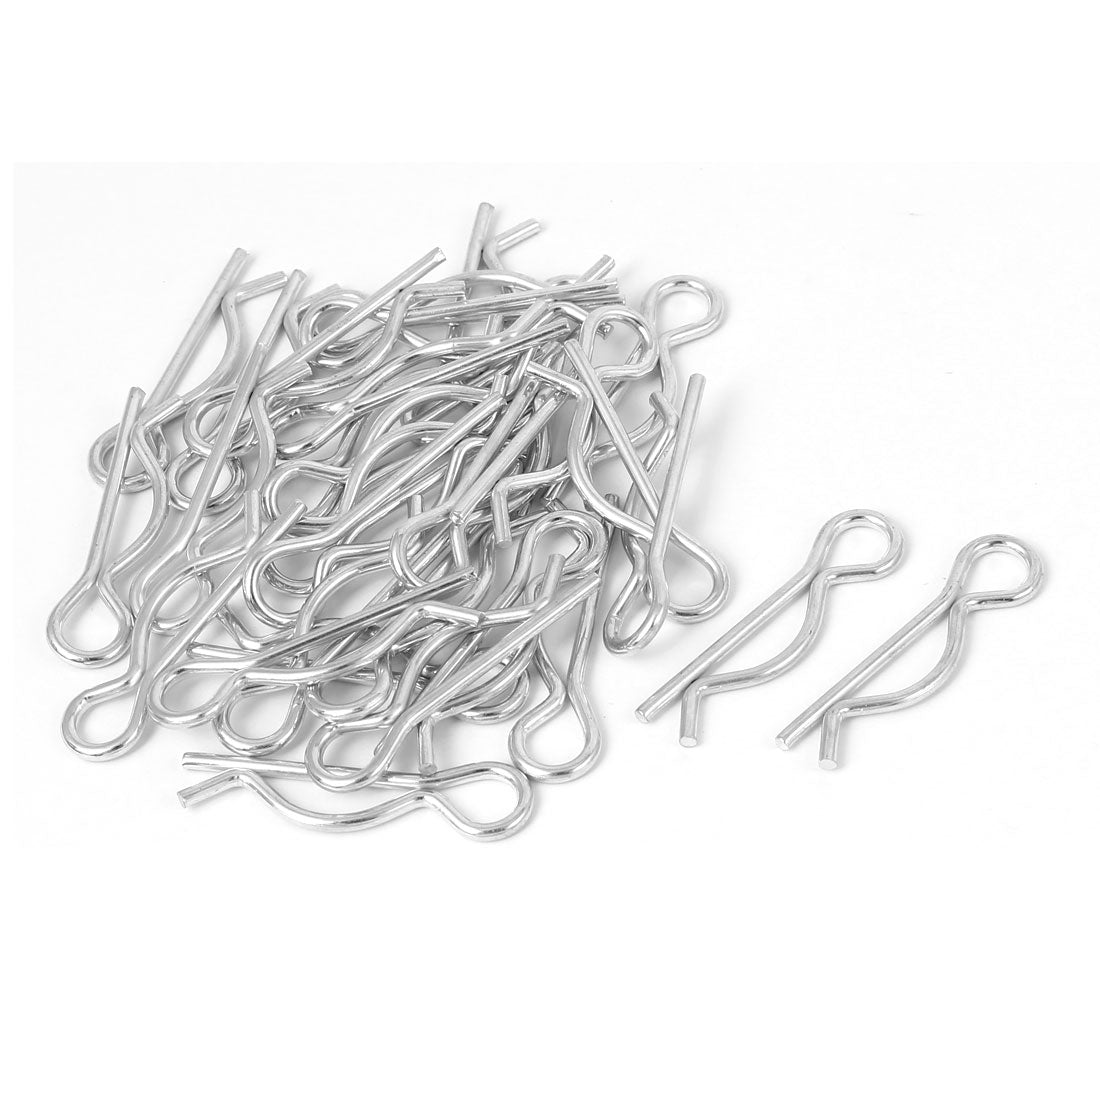 uxcell Uxcell 2mm x 40mm R-Clip Spring Locking Cotter Clip Pins Fastener Silver Tone 30 Pcs